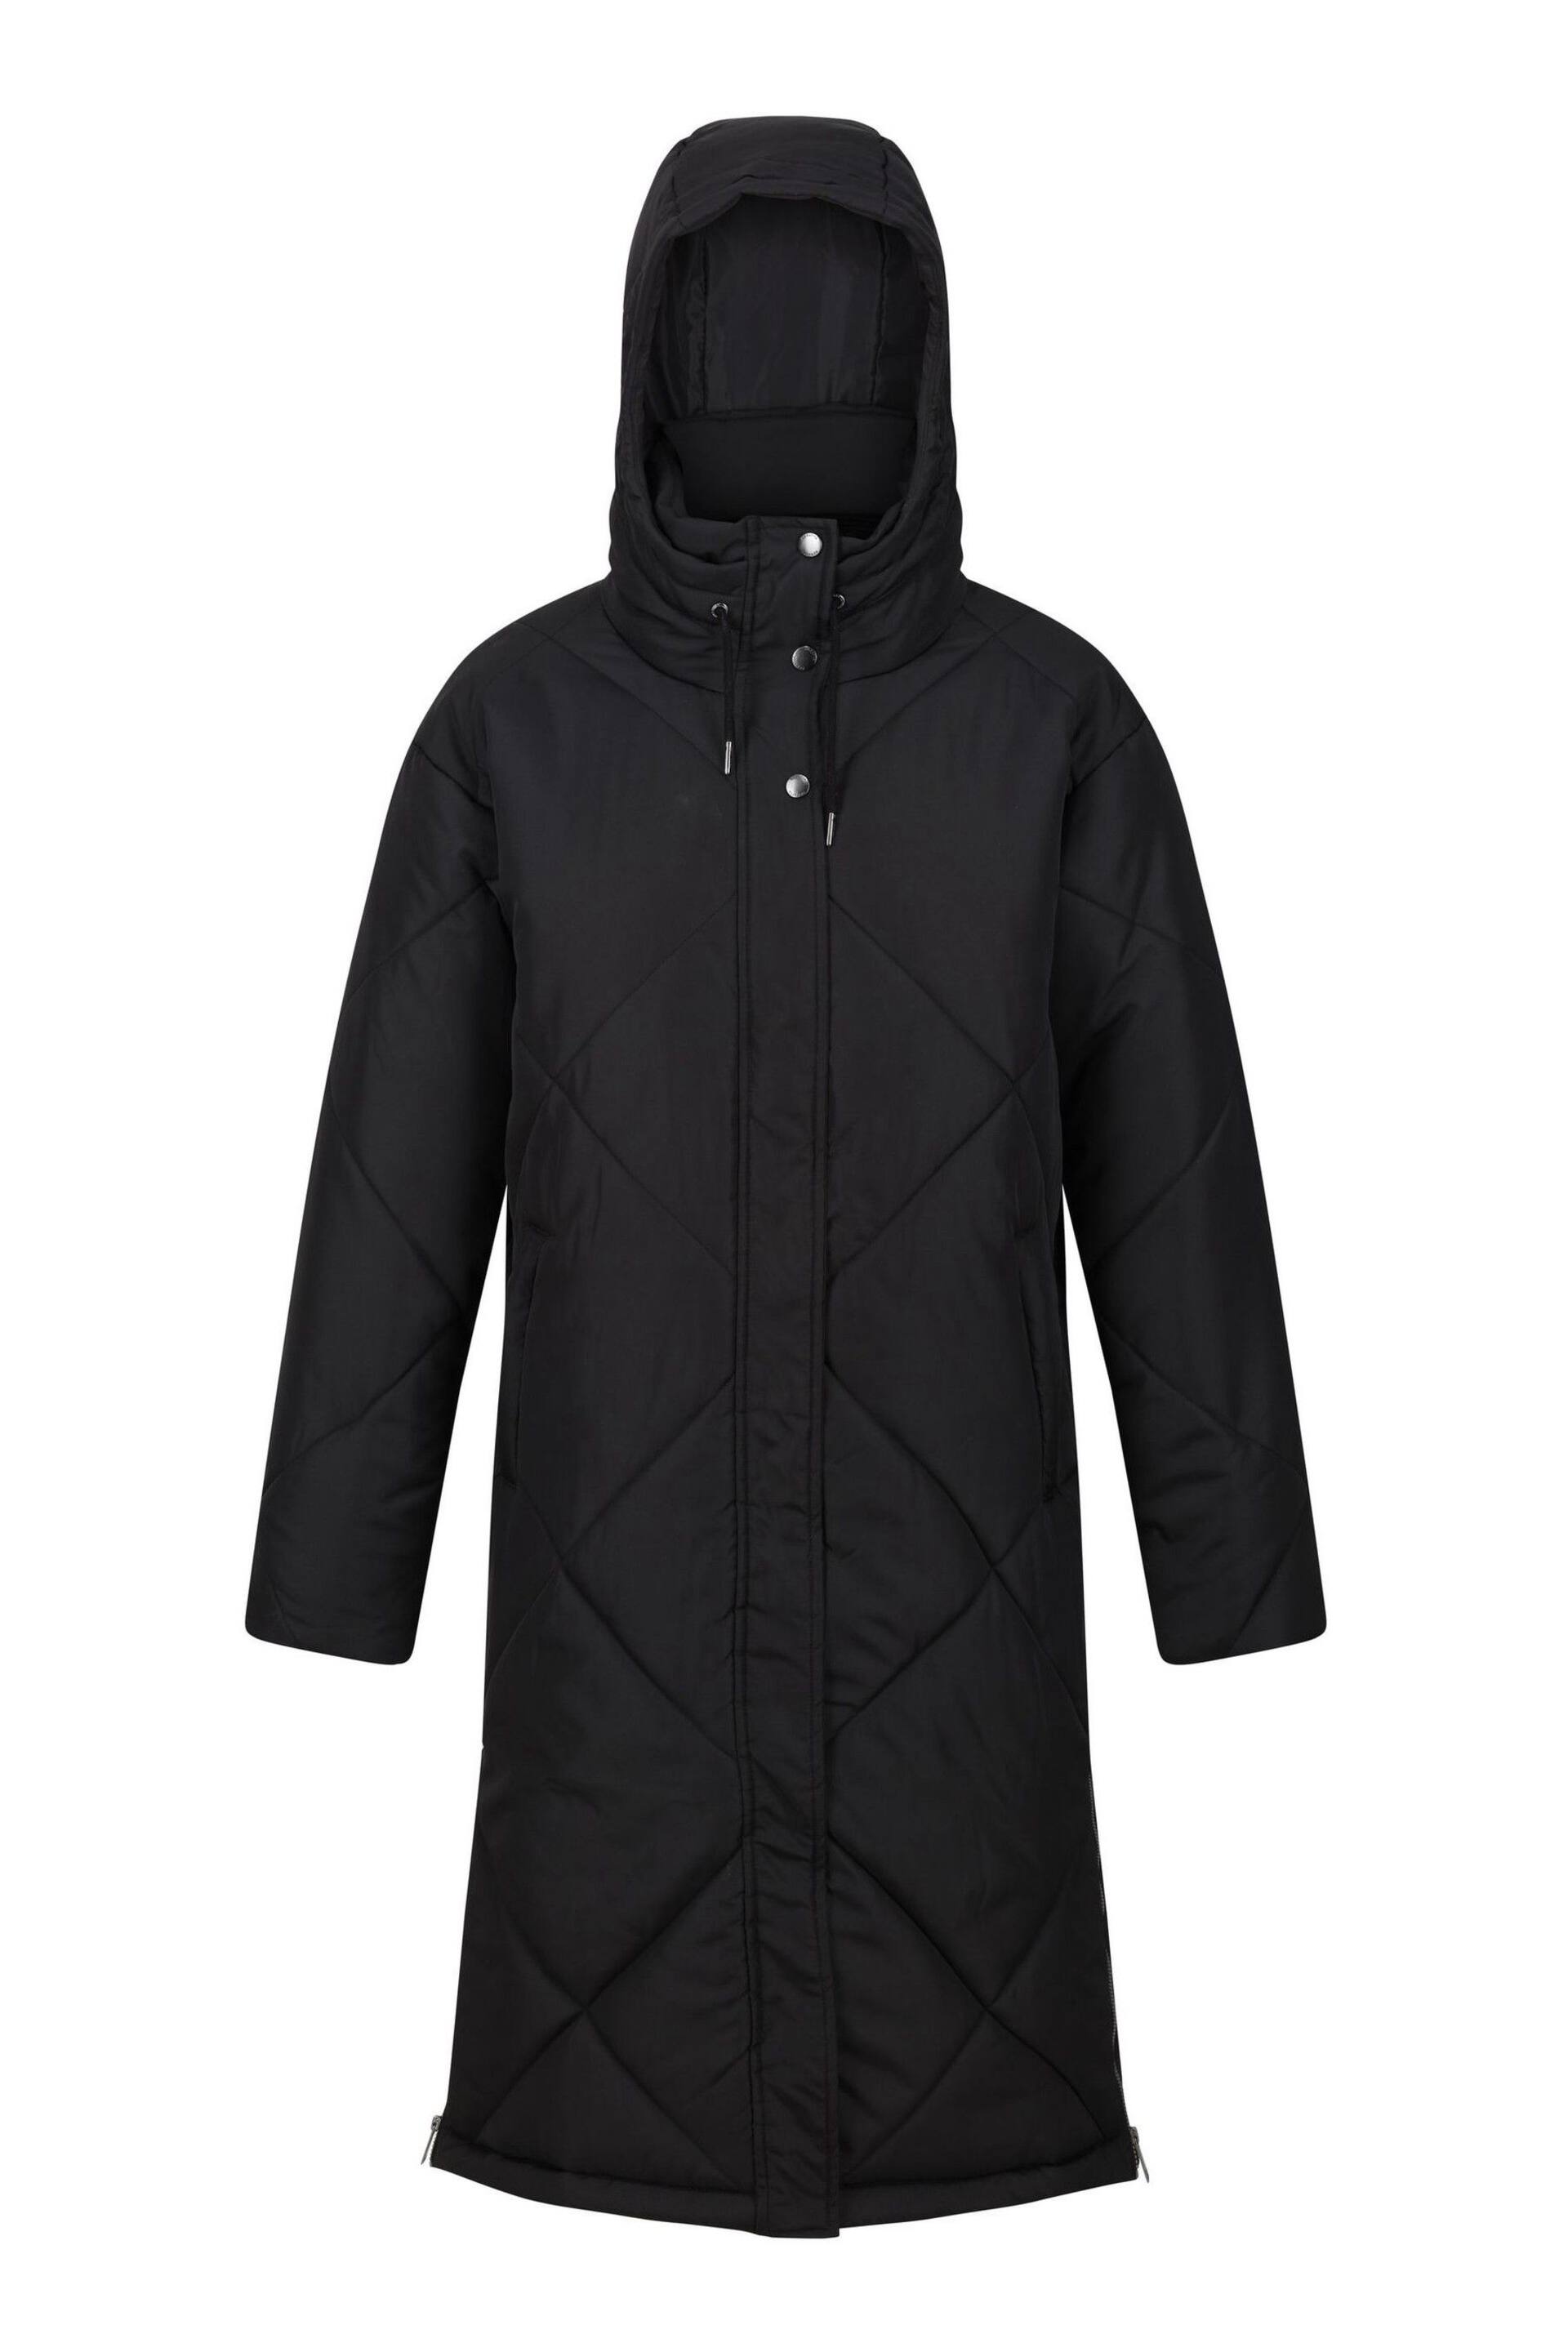 Regatta Black Cambrie Longline Padded Thermal Jacket - Image 7 of 9